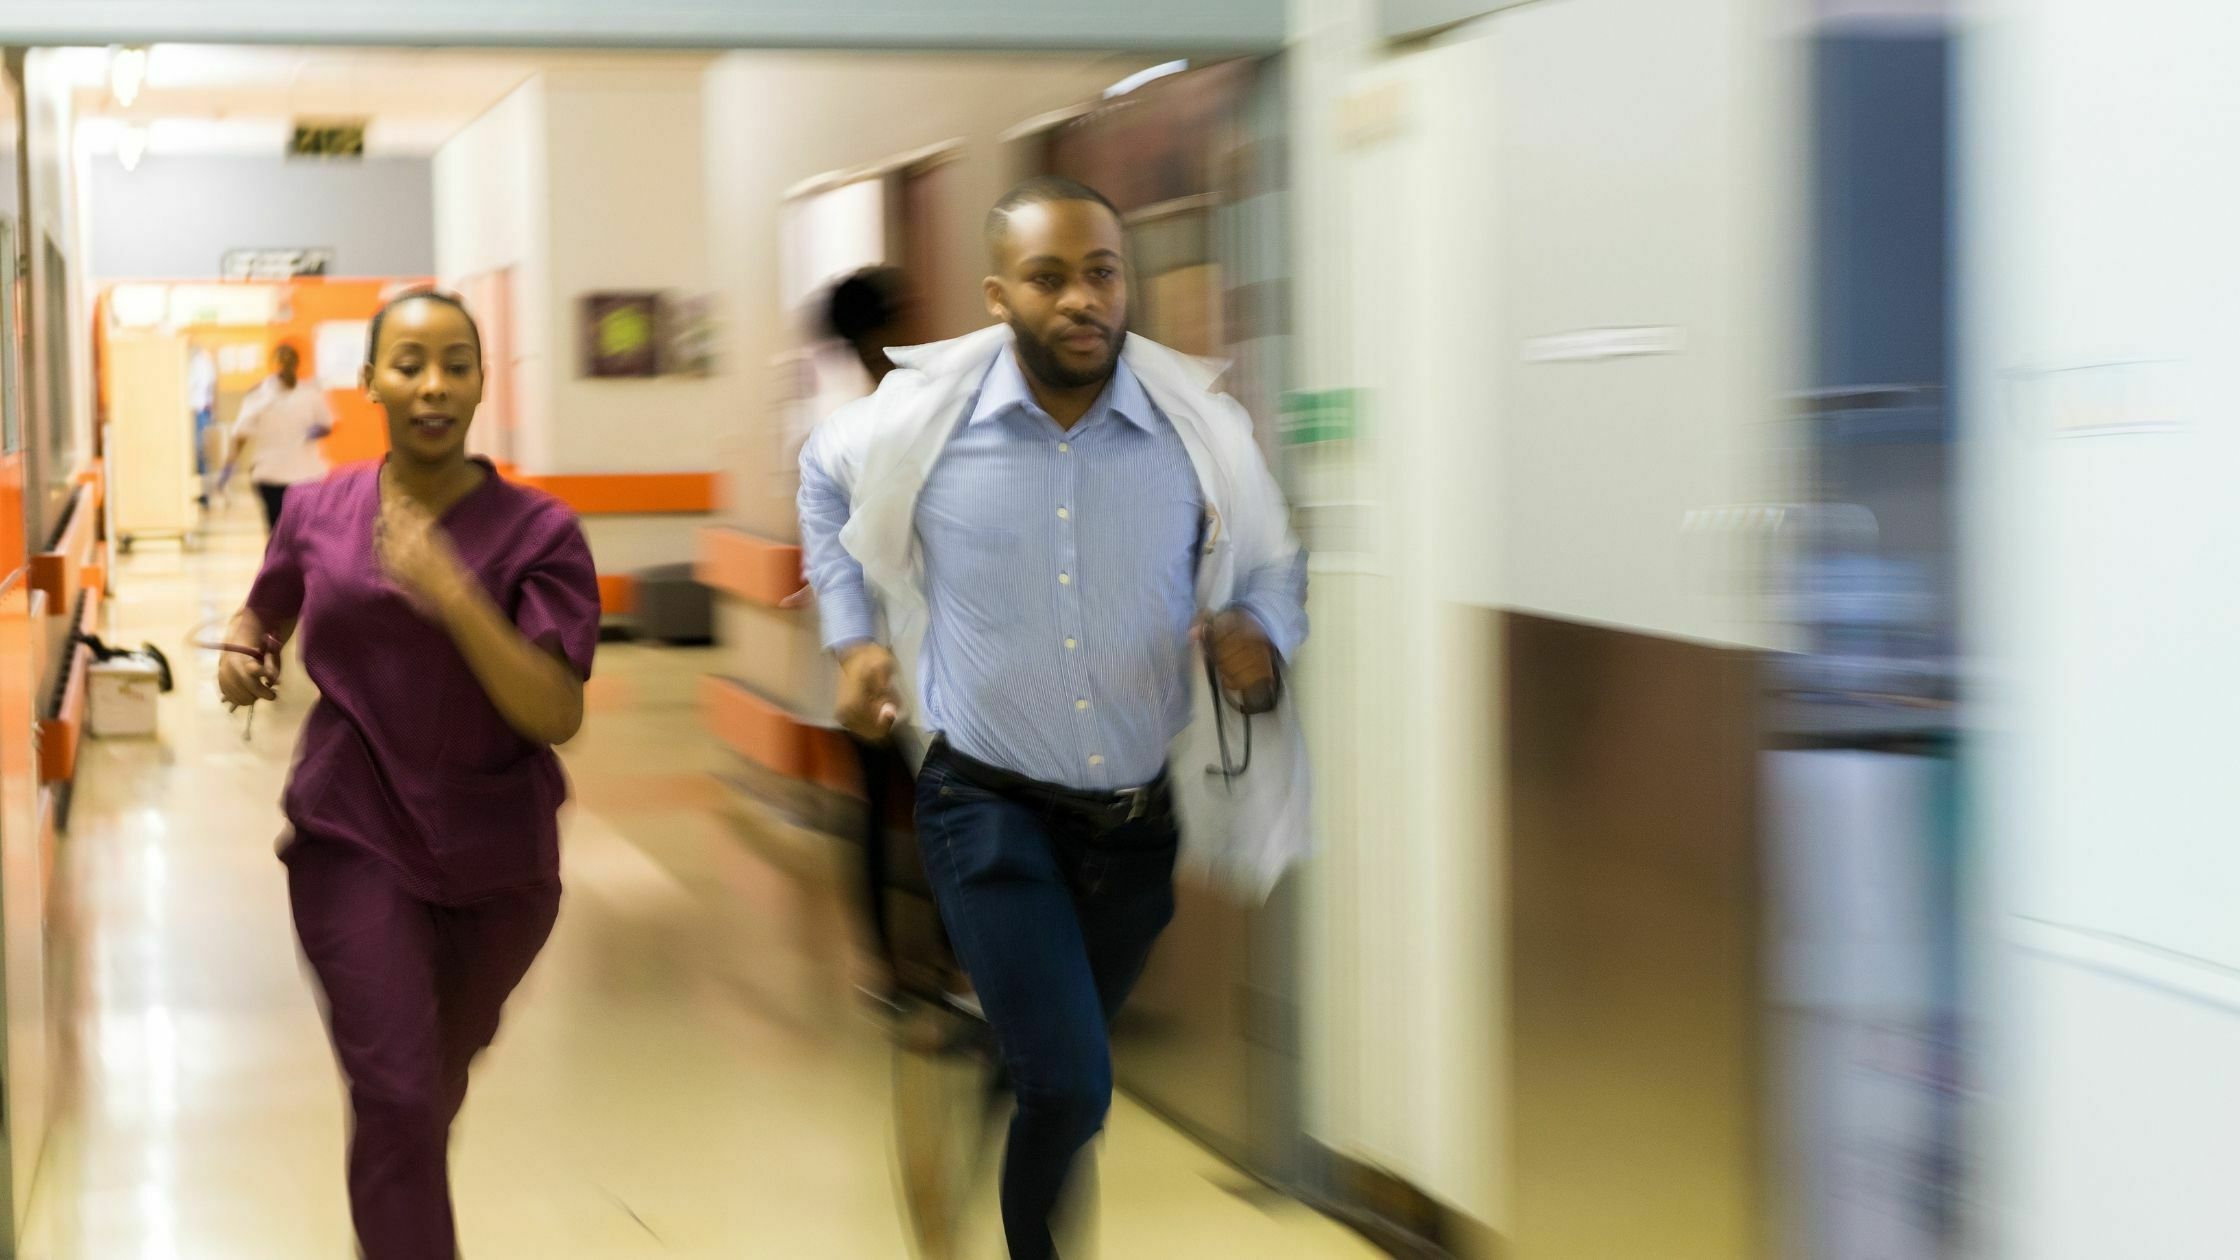 A man in blue shirt and white jacket running through hallway.